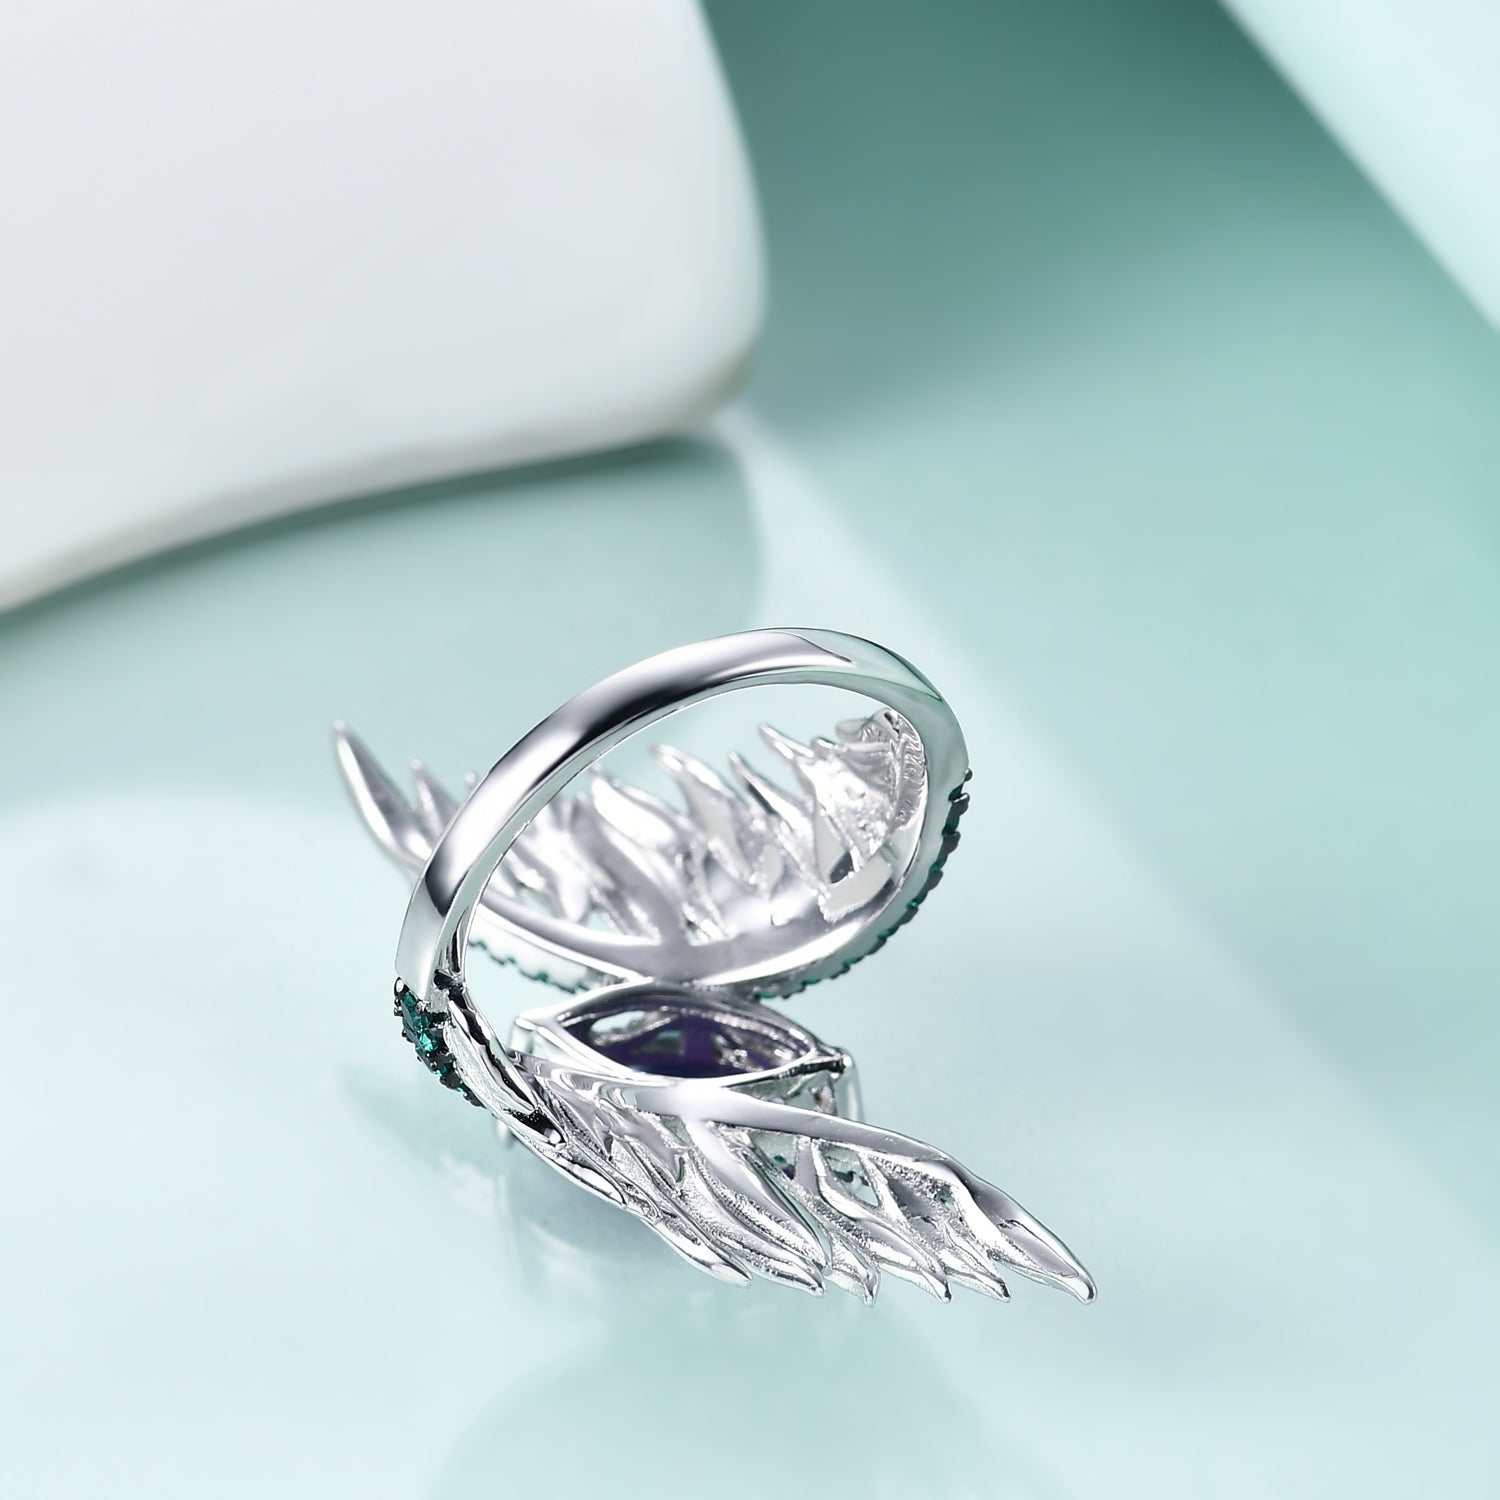 Original Design Jewelry Angel Wings Ring White Gold Colour Real 925 Sterling Silver Party Jewelry